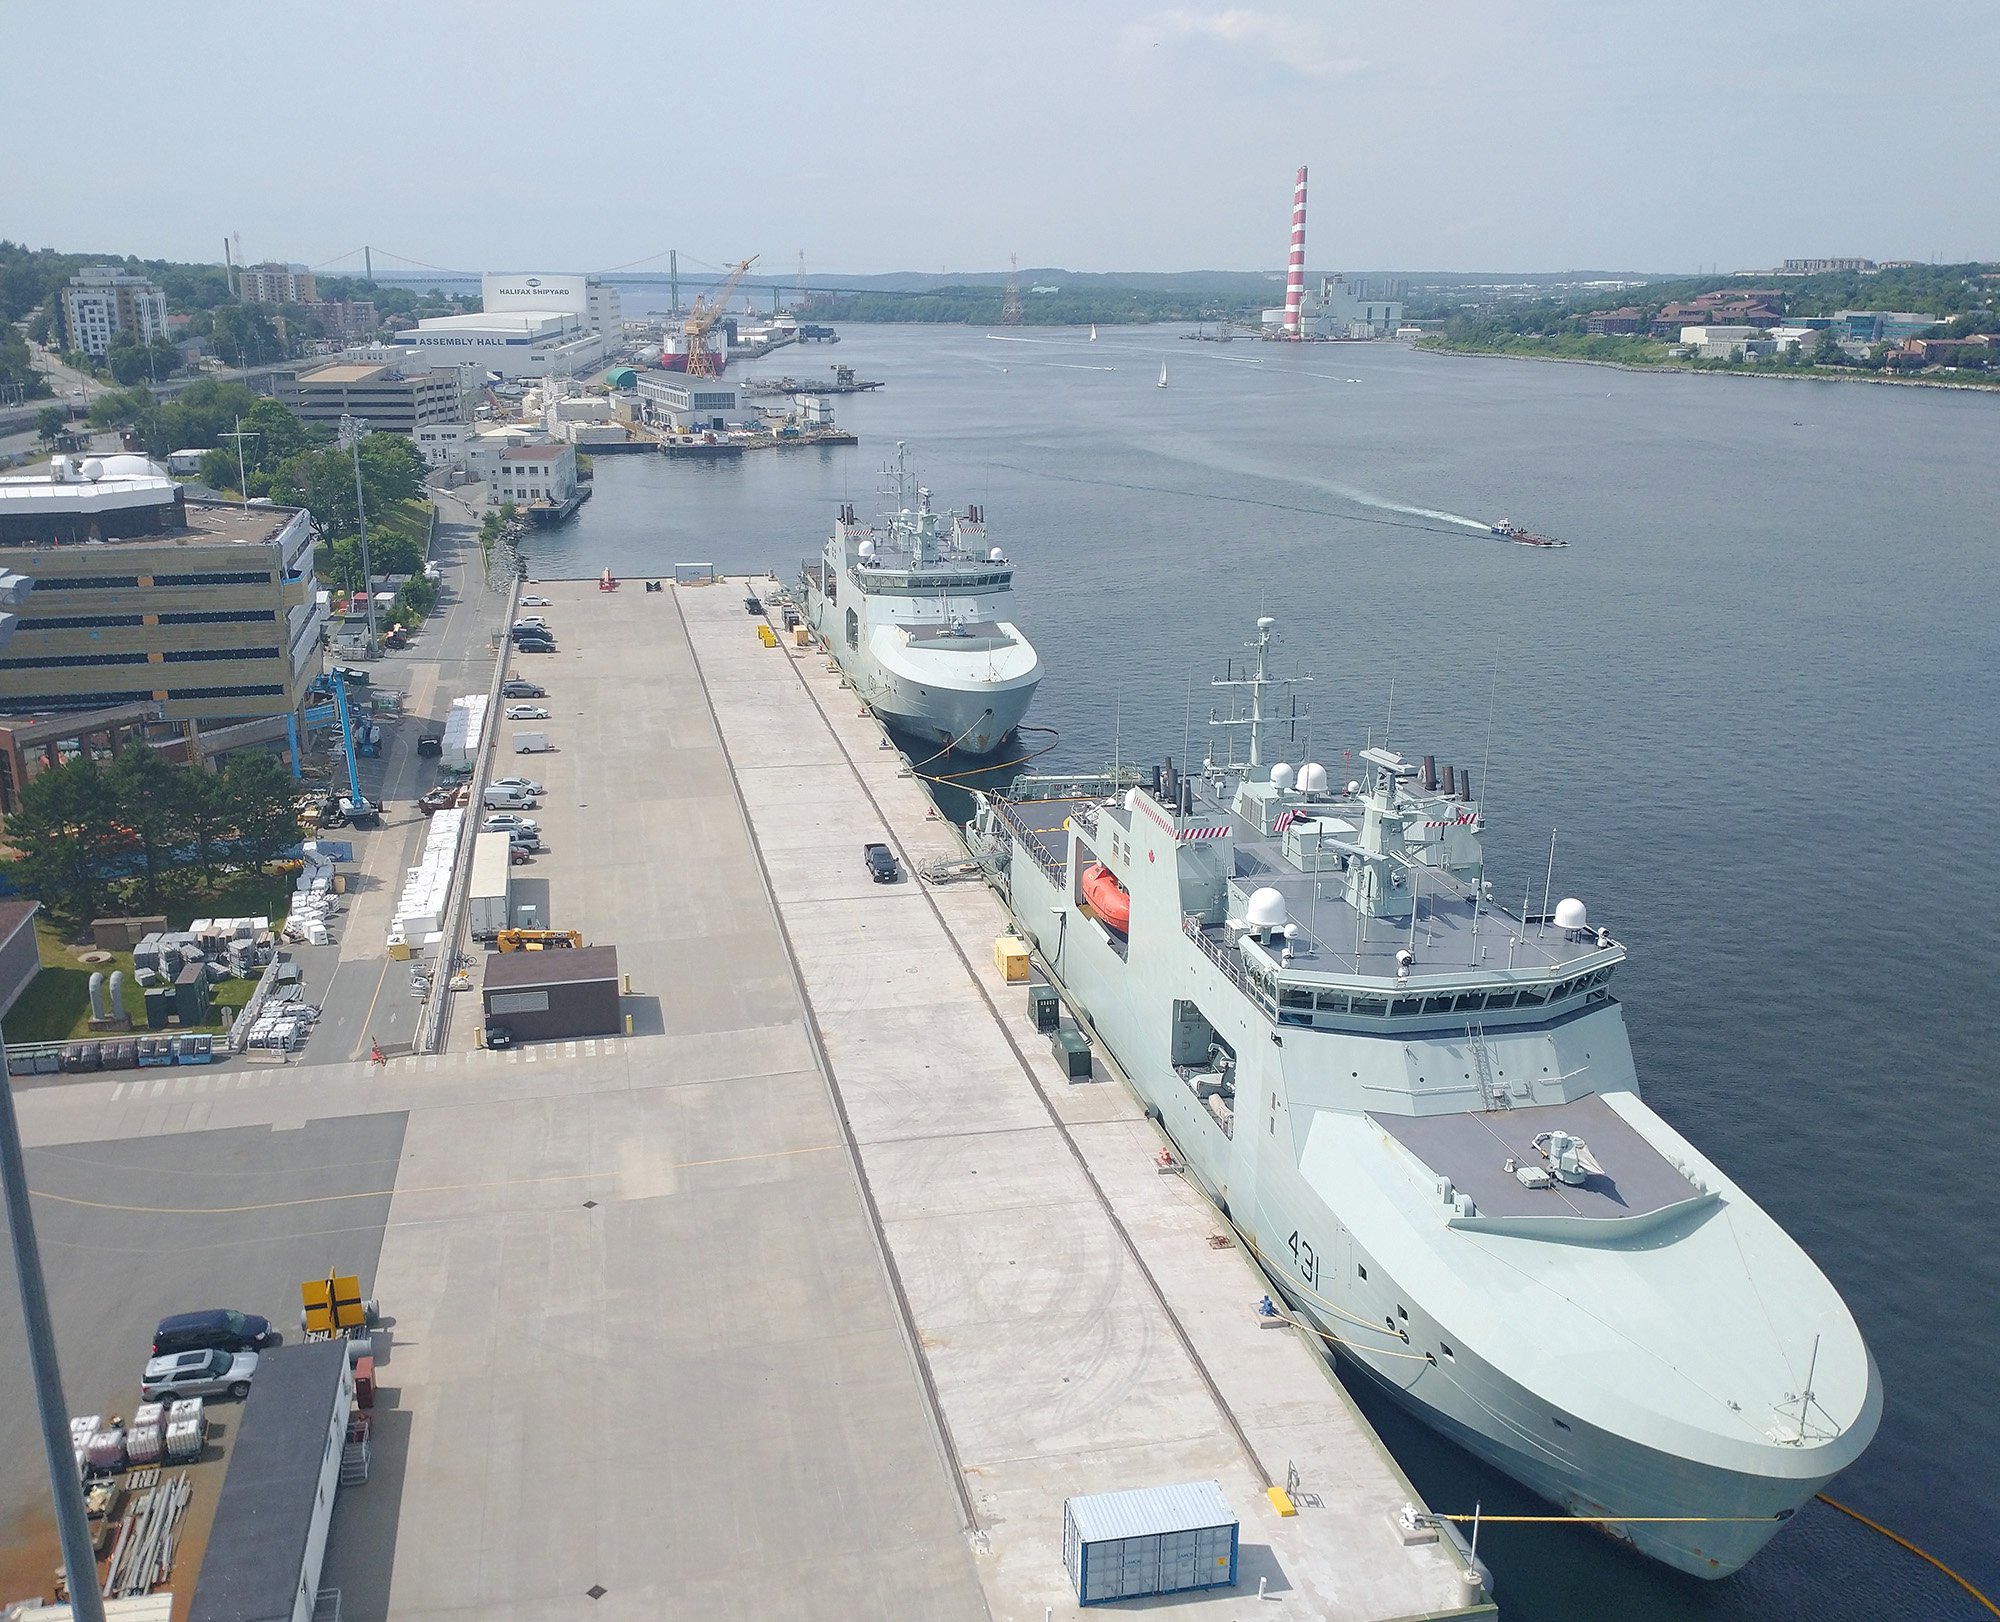 The harbor from the bridge, with some of Canada's fleet hanging out. God I wonder how many of my tax dollars they blew on this.